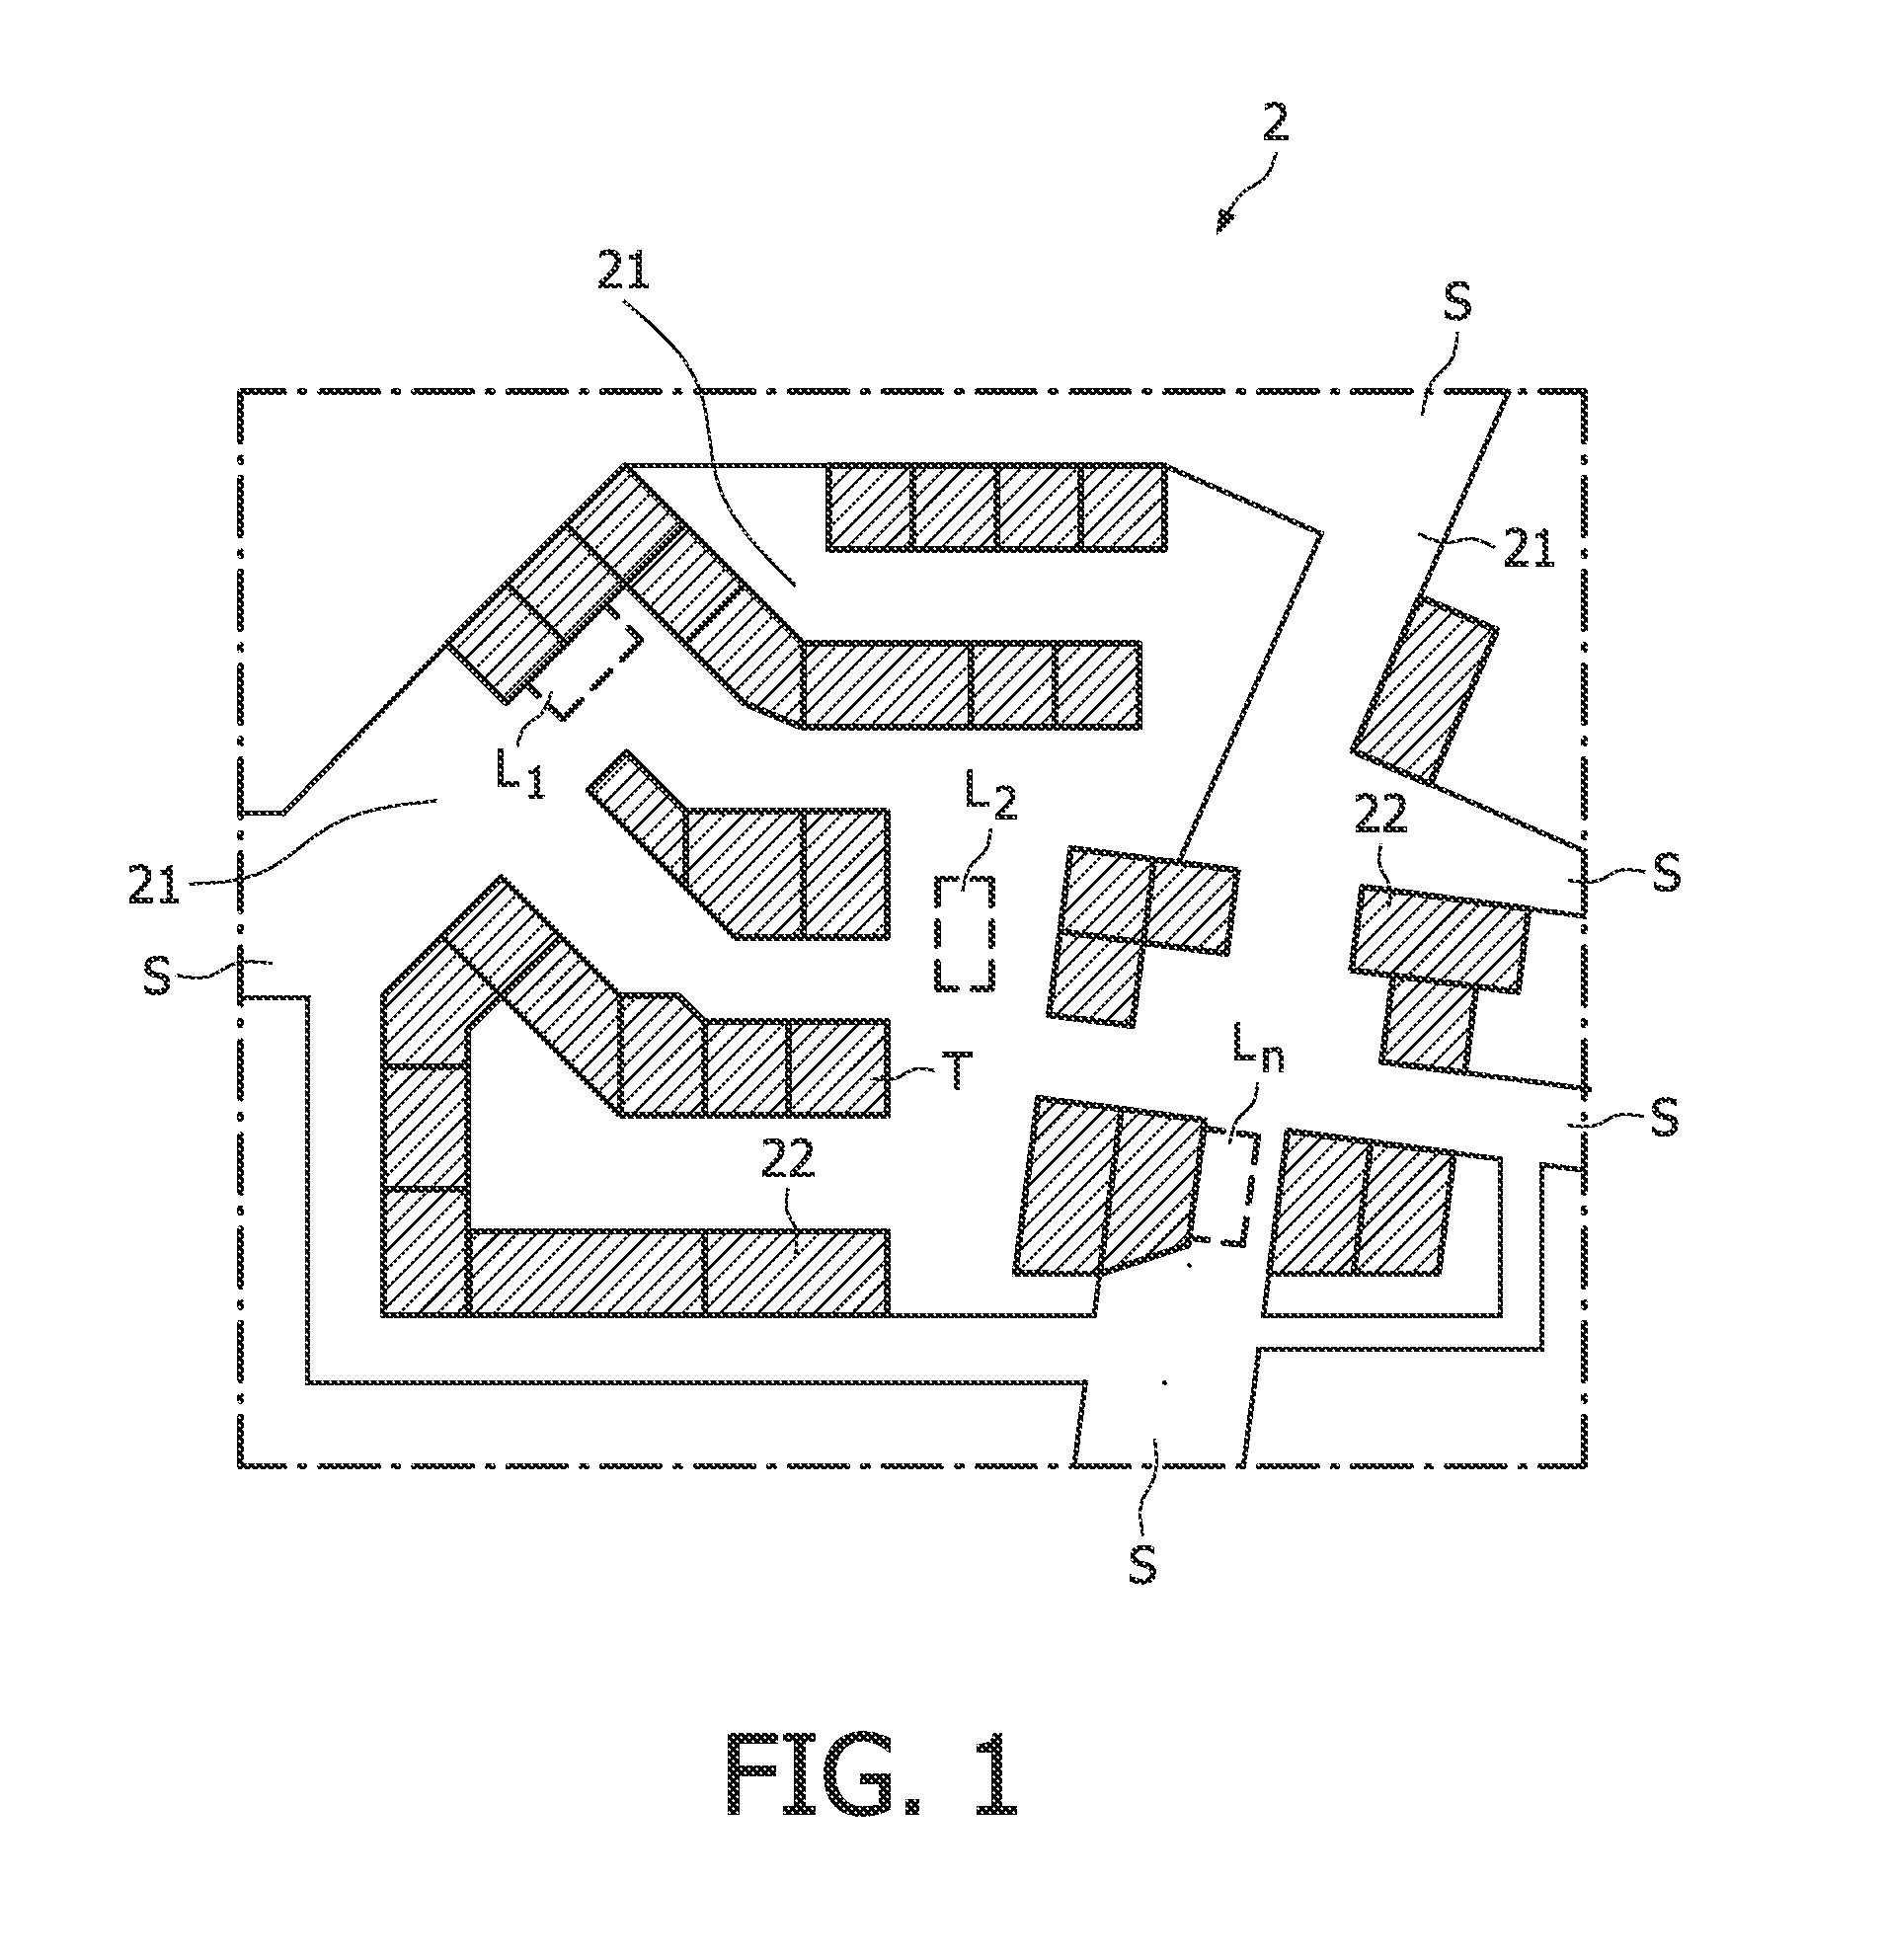 Method of guiding a user from an initial position to a destination in a public area